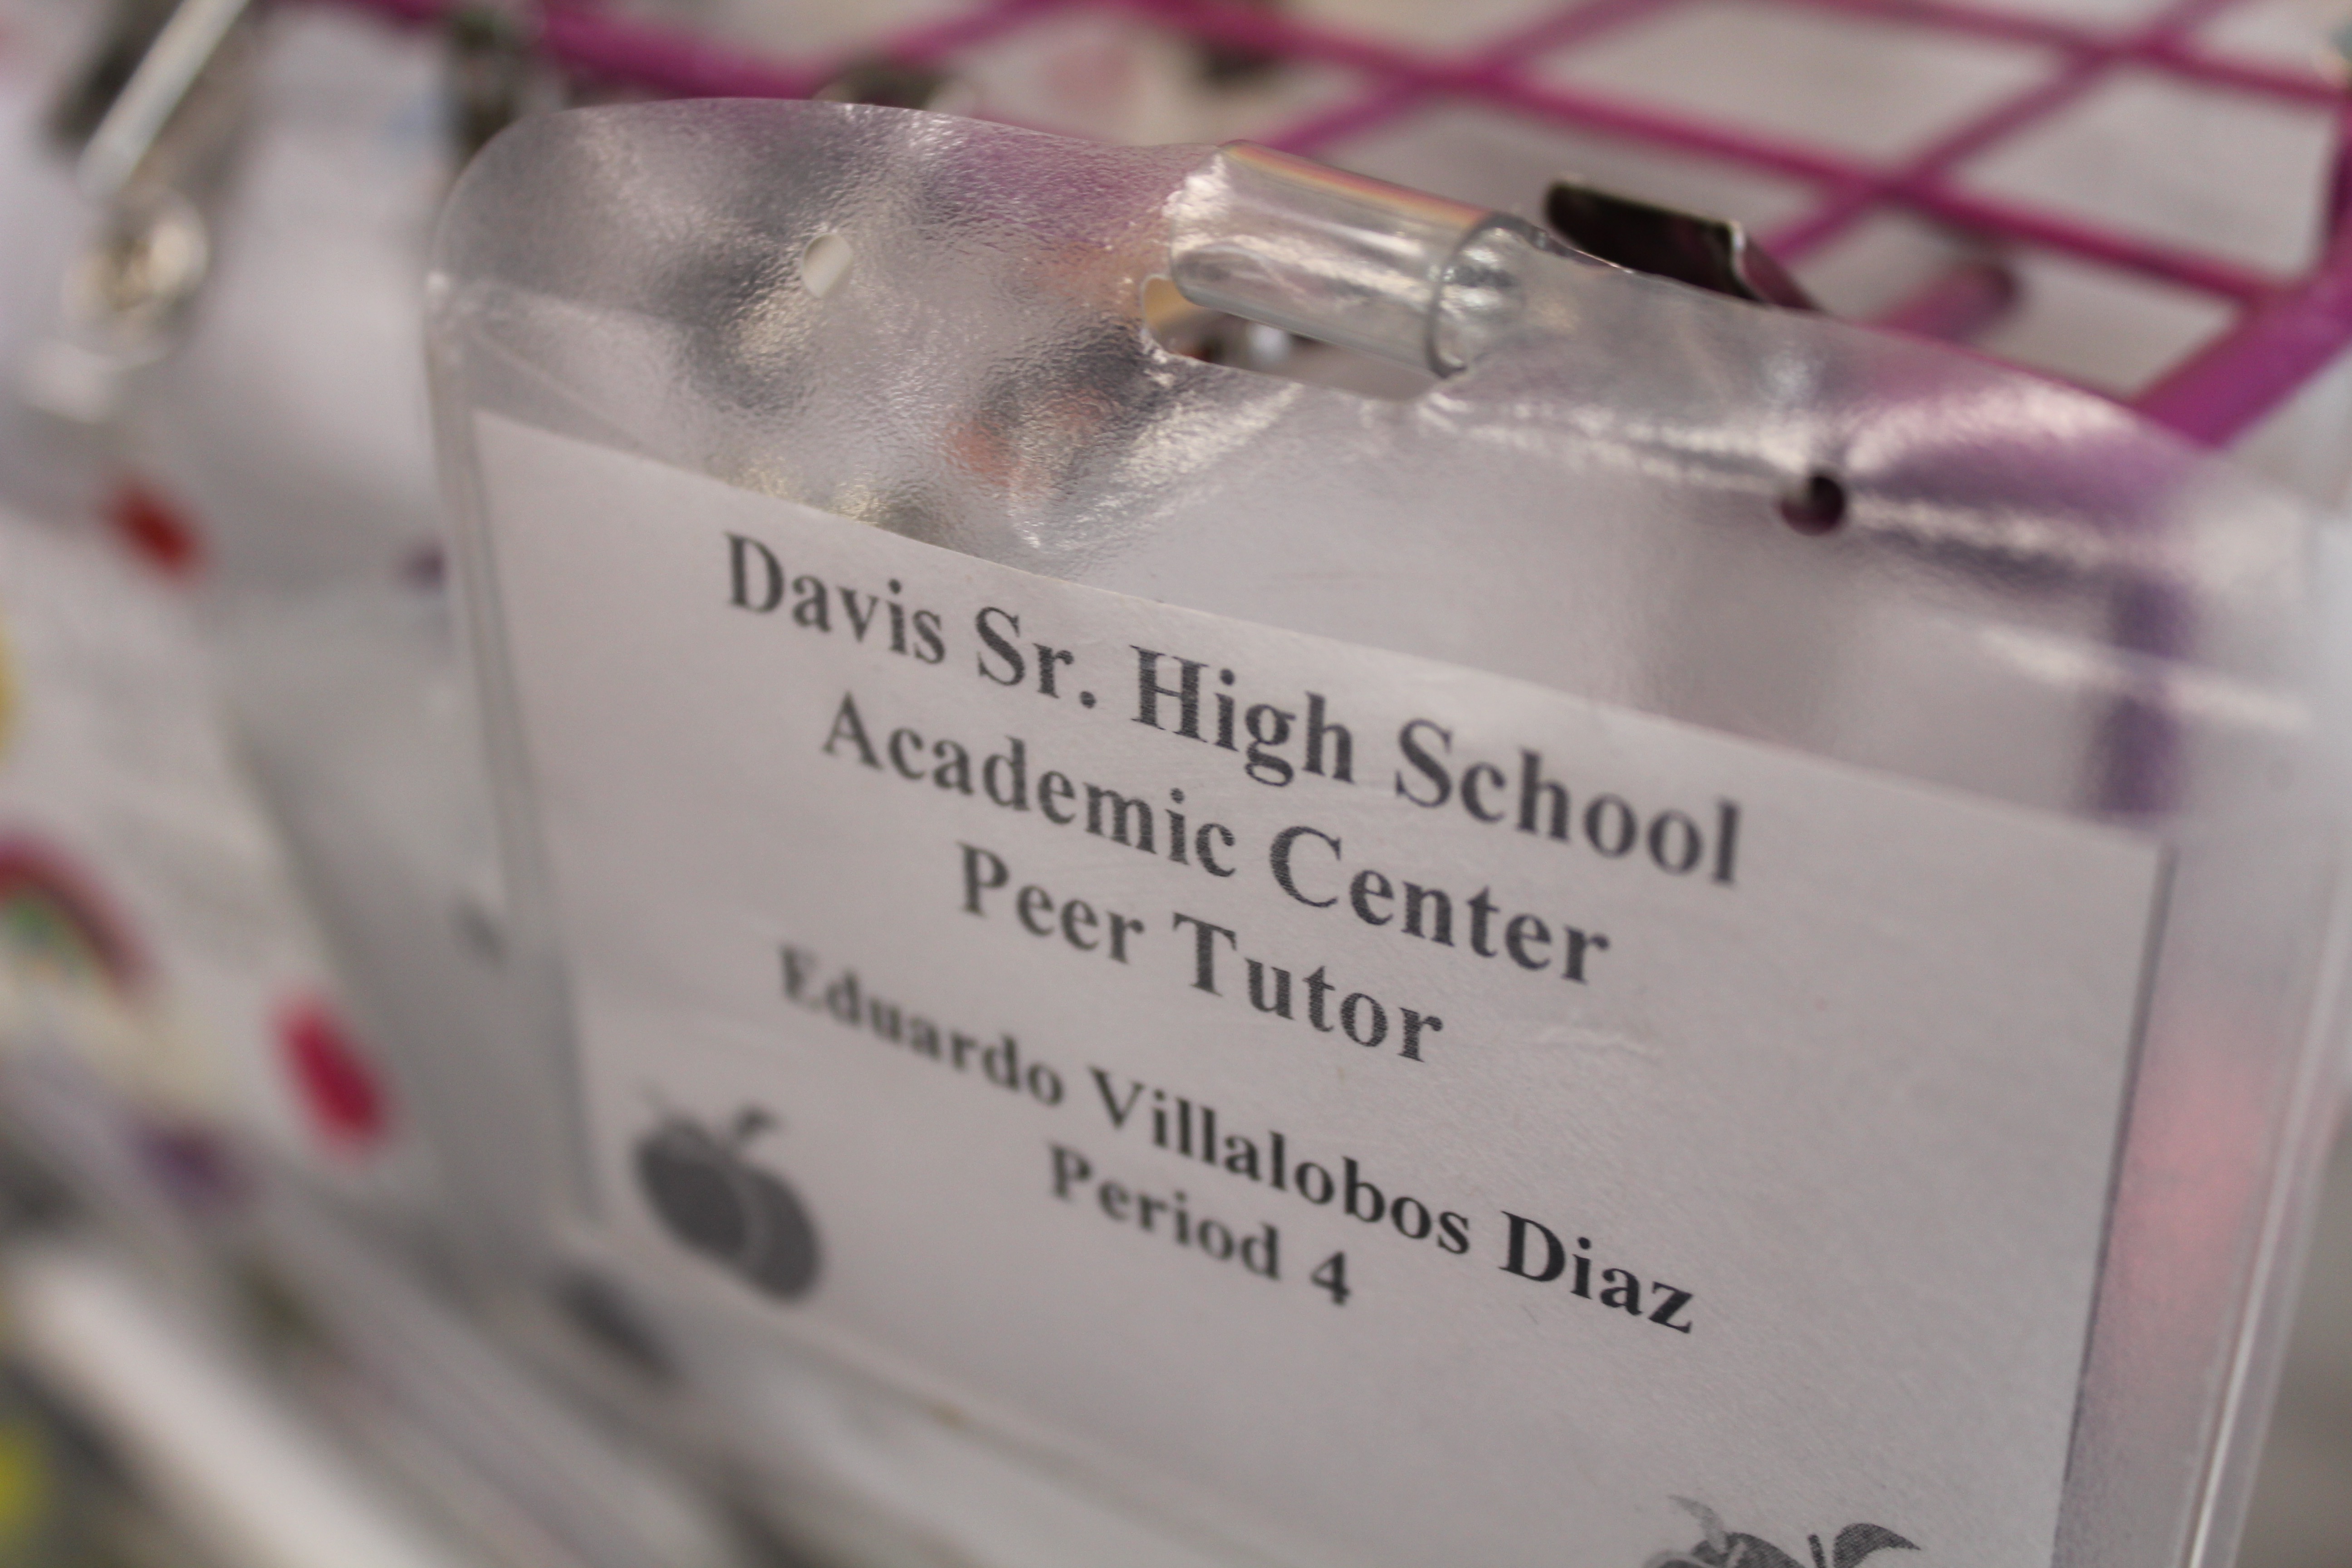 Students at Davis High can go to the Academic Center five days a week.